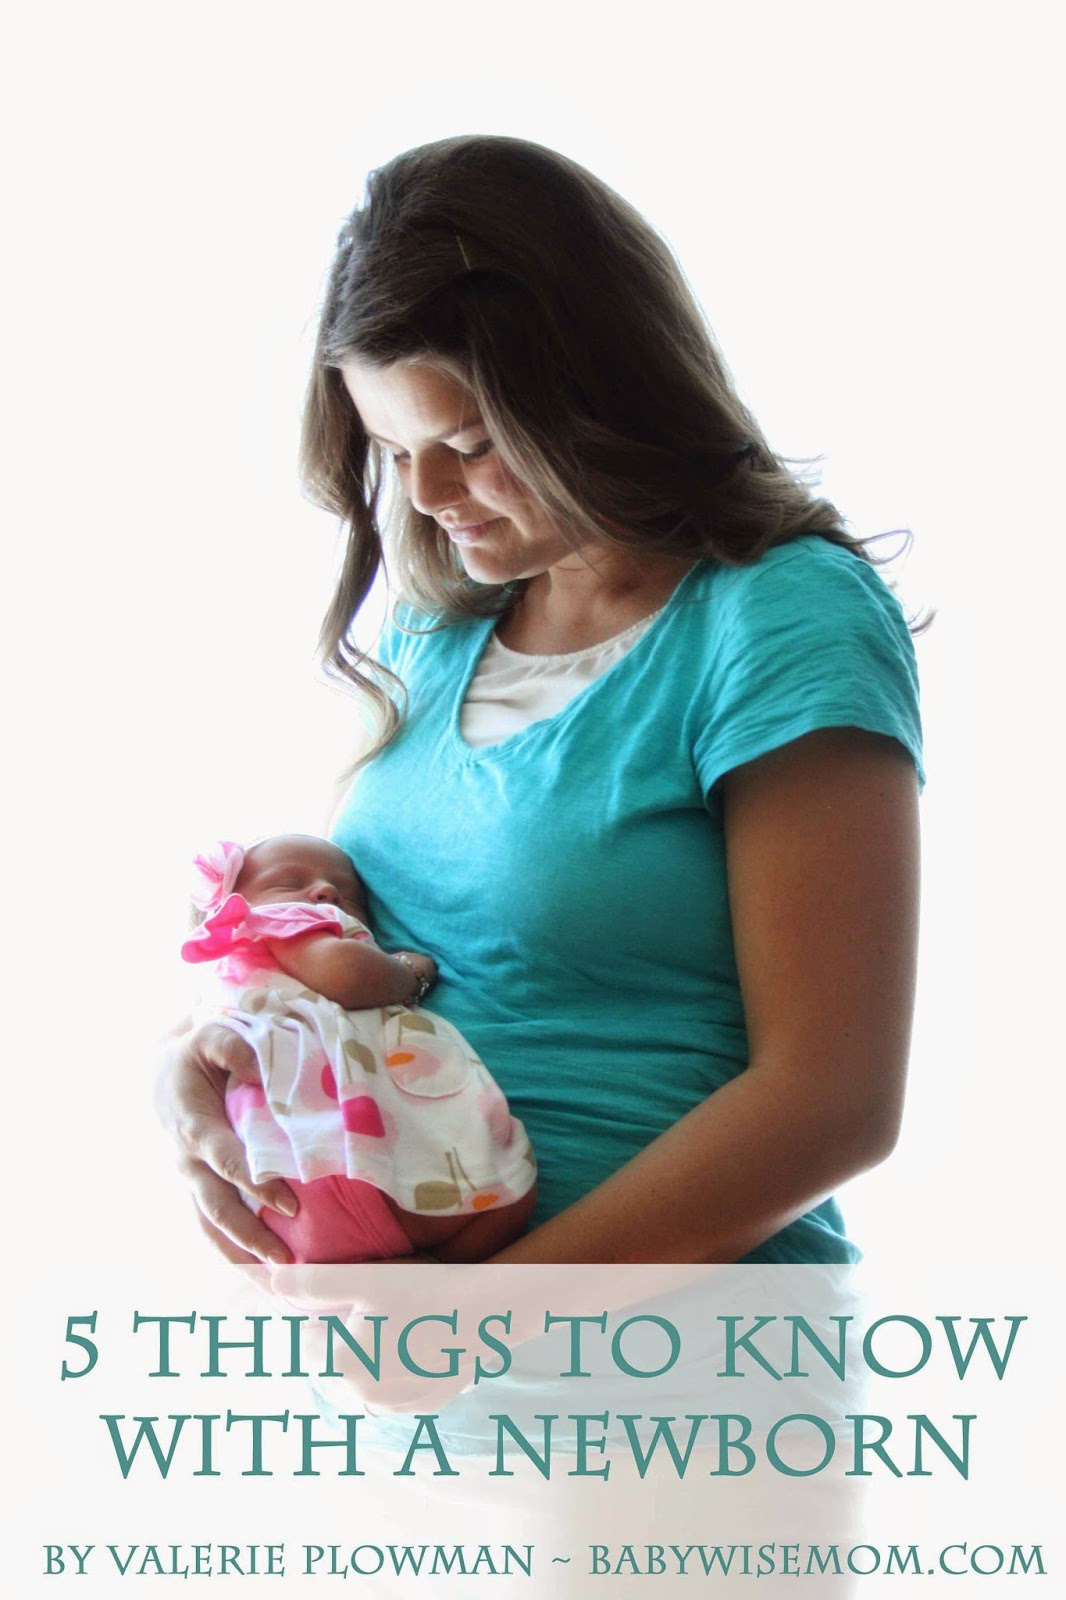 5 Things to Know with a Newborn